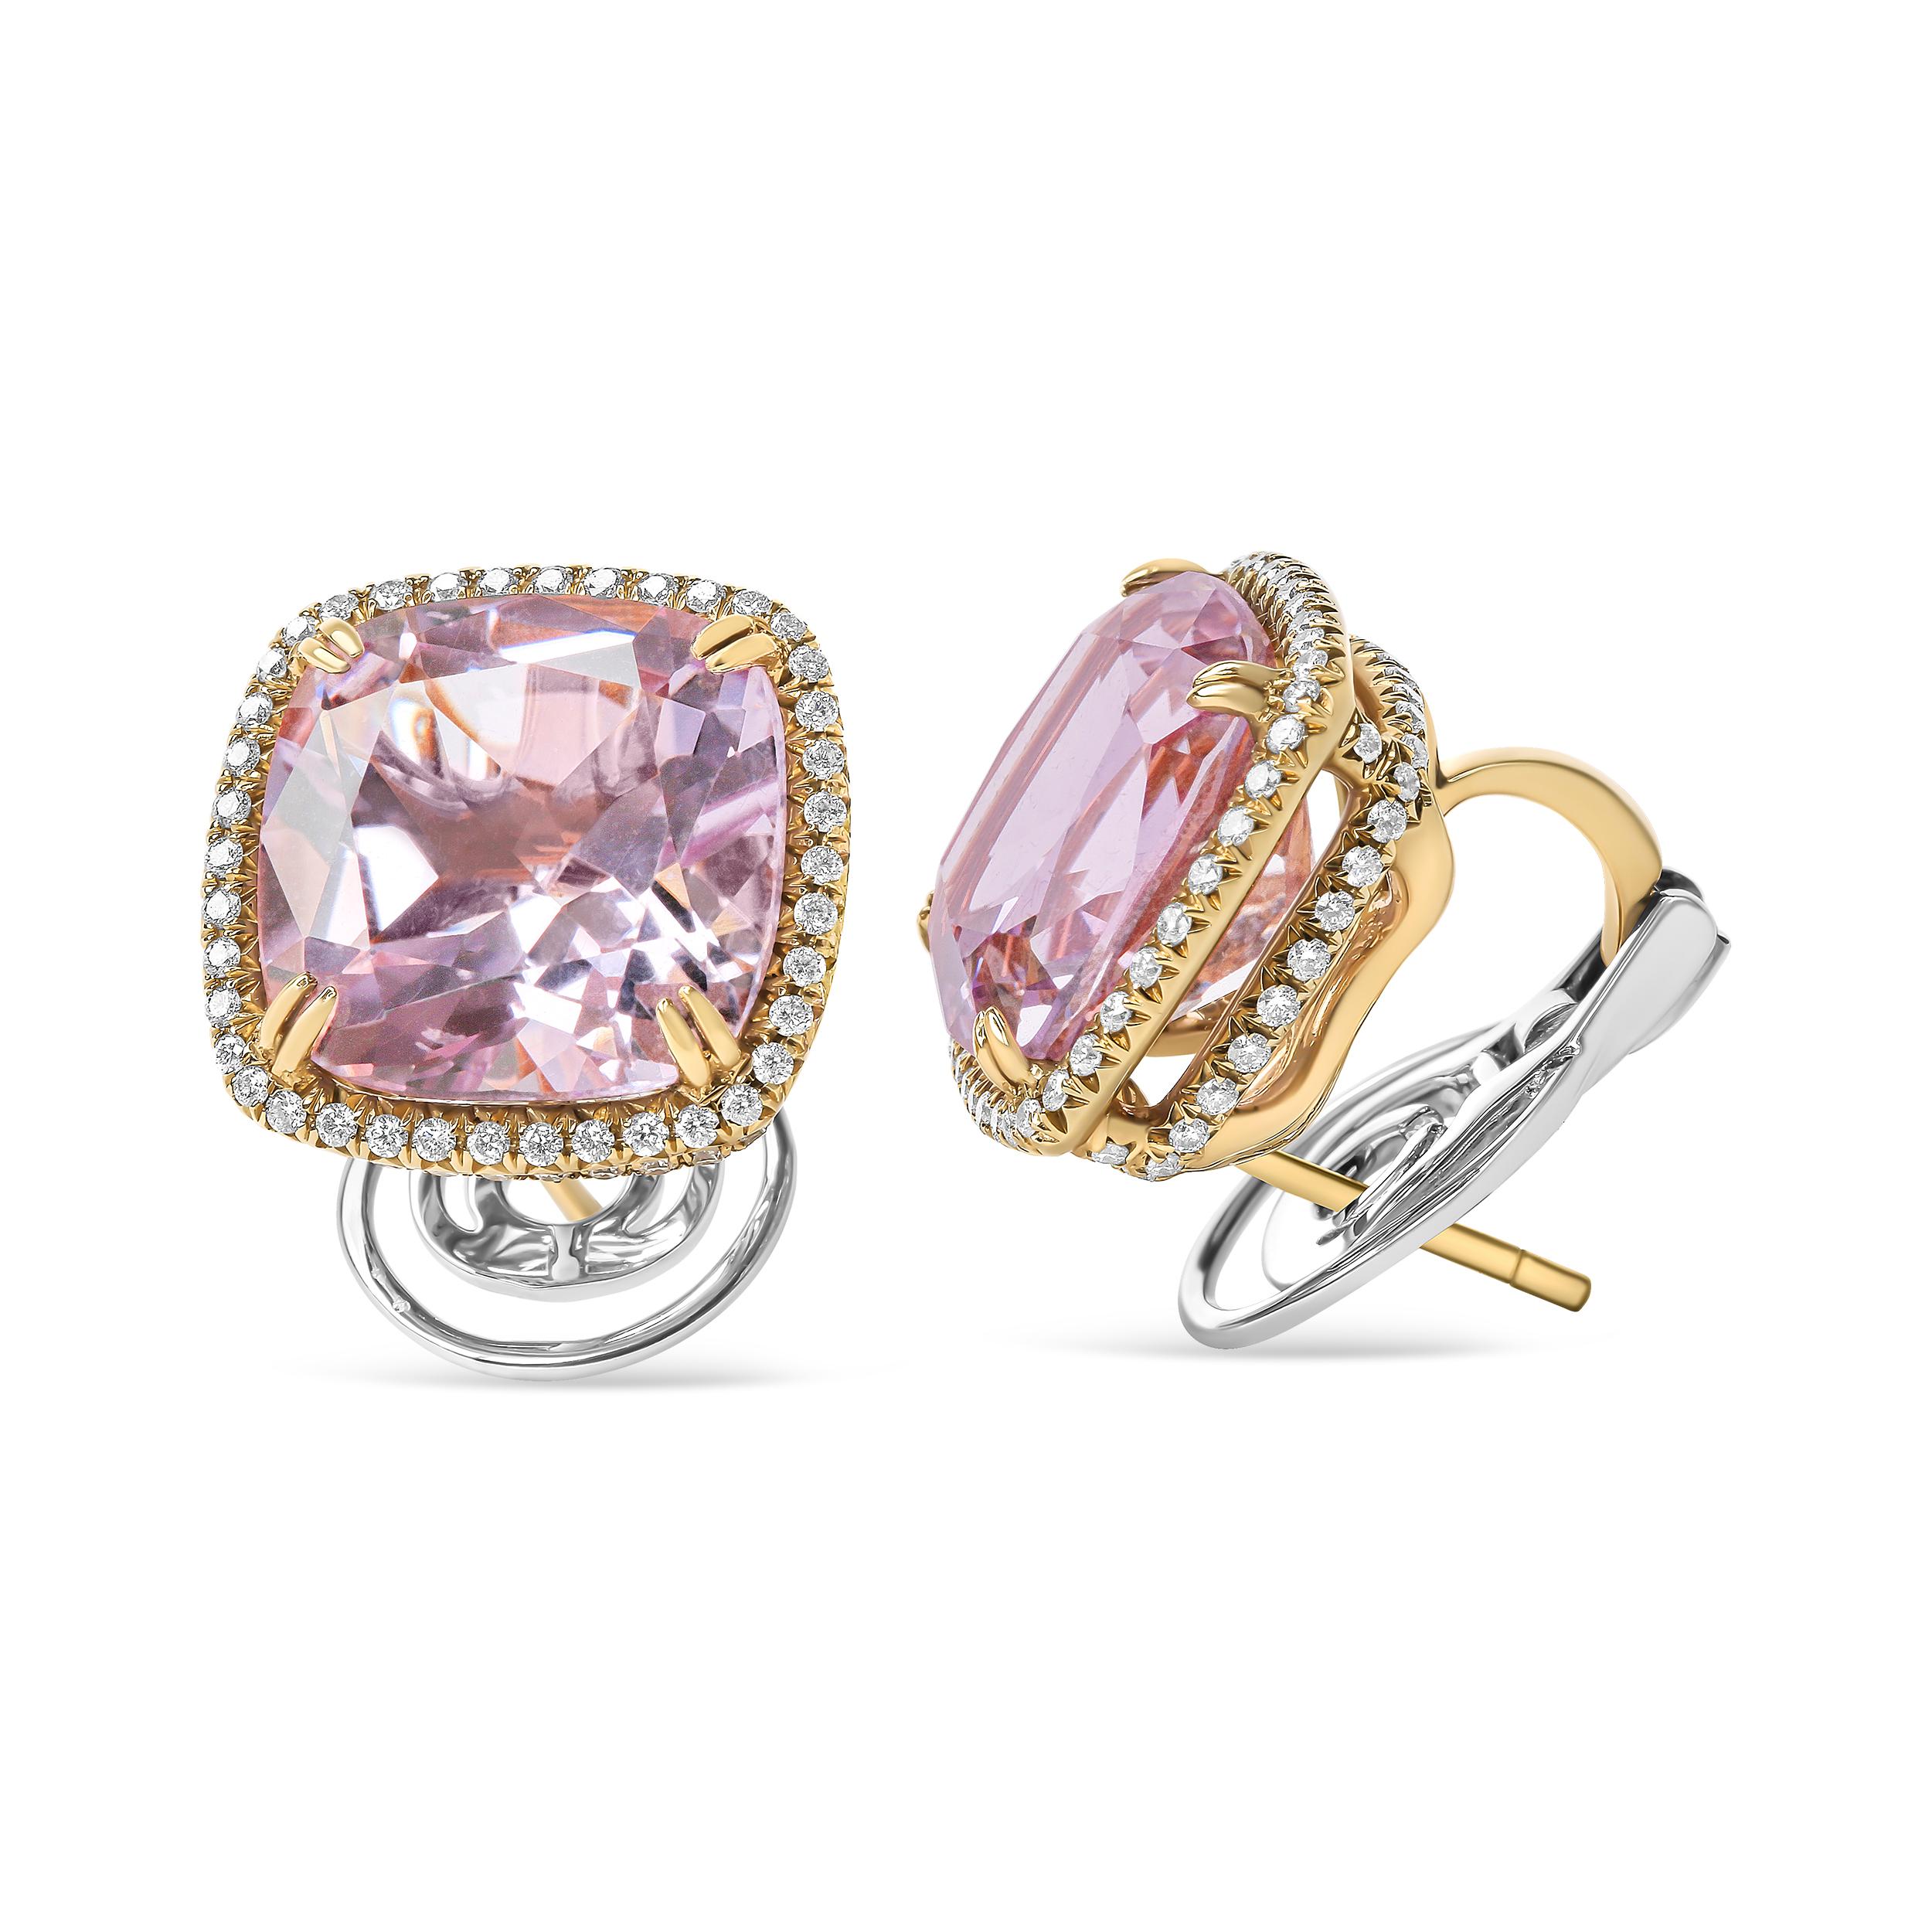 Elegant and captivating, these 18k white and rose gold stud earrings are a delight to show off! A natural 15mm cushion-cut heat-treated pink amethyst offers a modern twist to the classic stud, cradled within a 4-prong setting. A halo of round